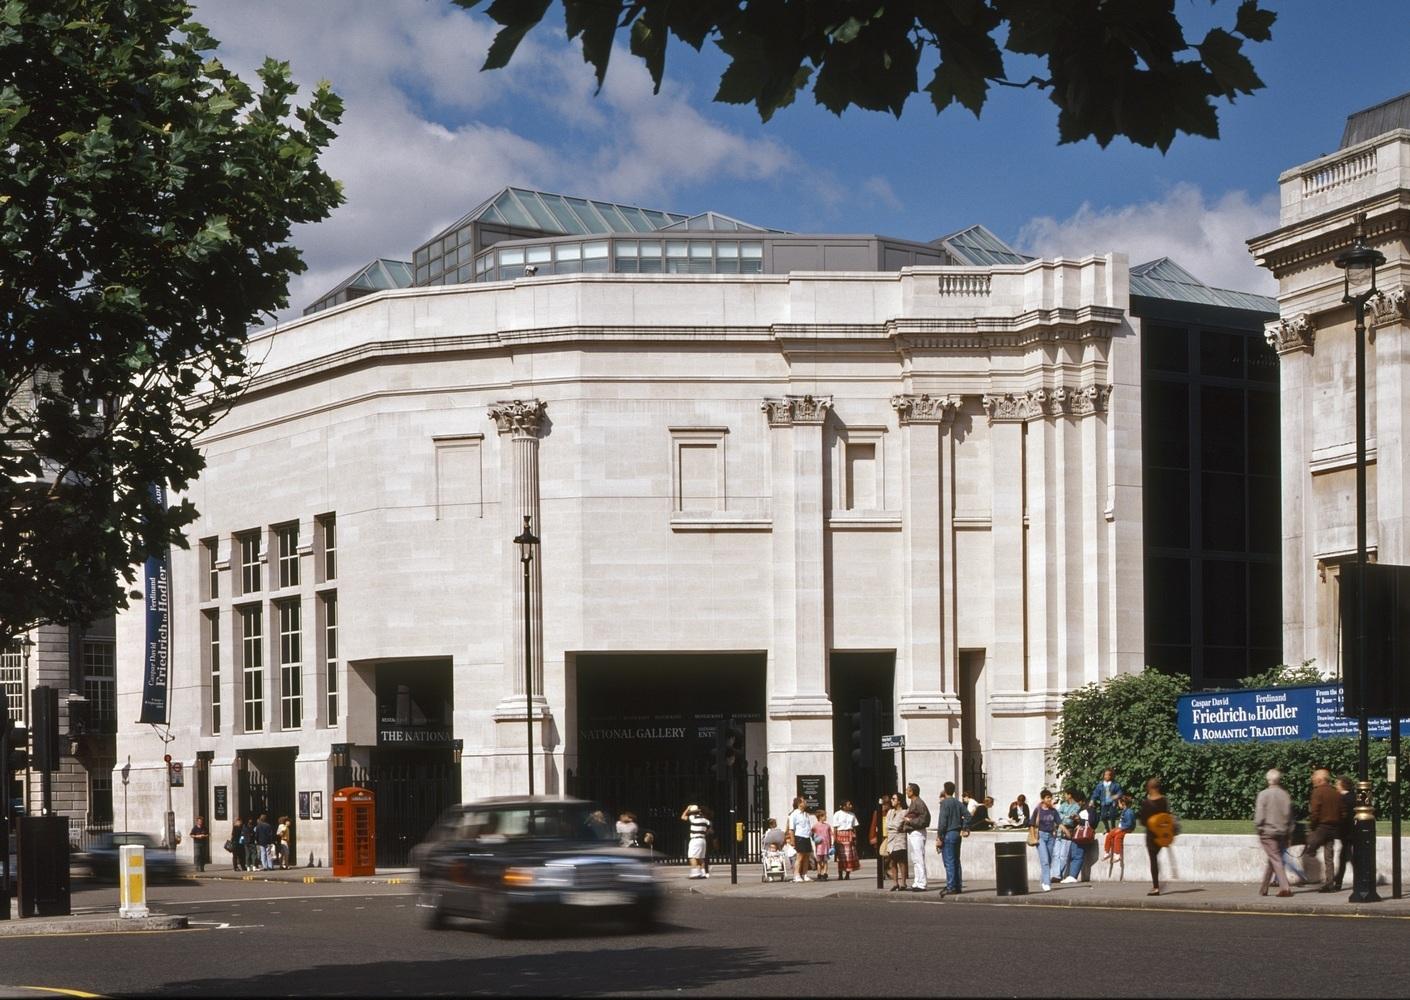 Sainsbury Wing Of The National Gallery: A Postmodern Marvel